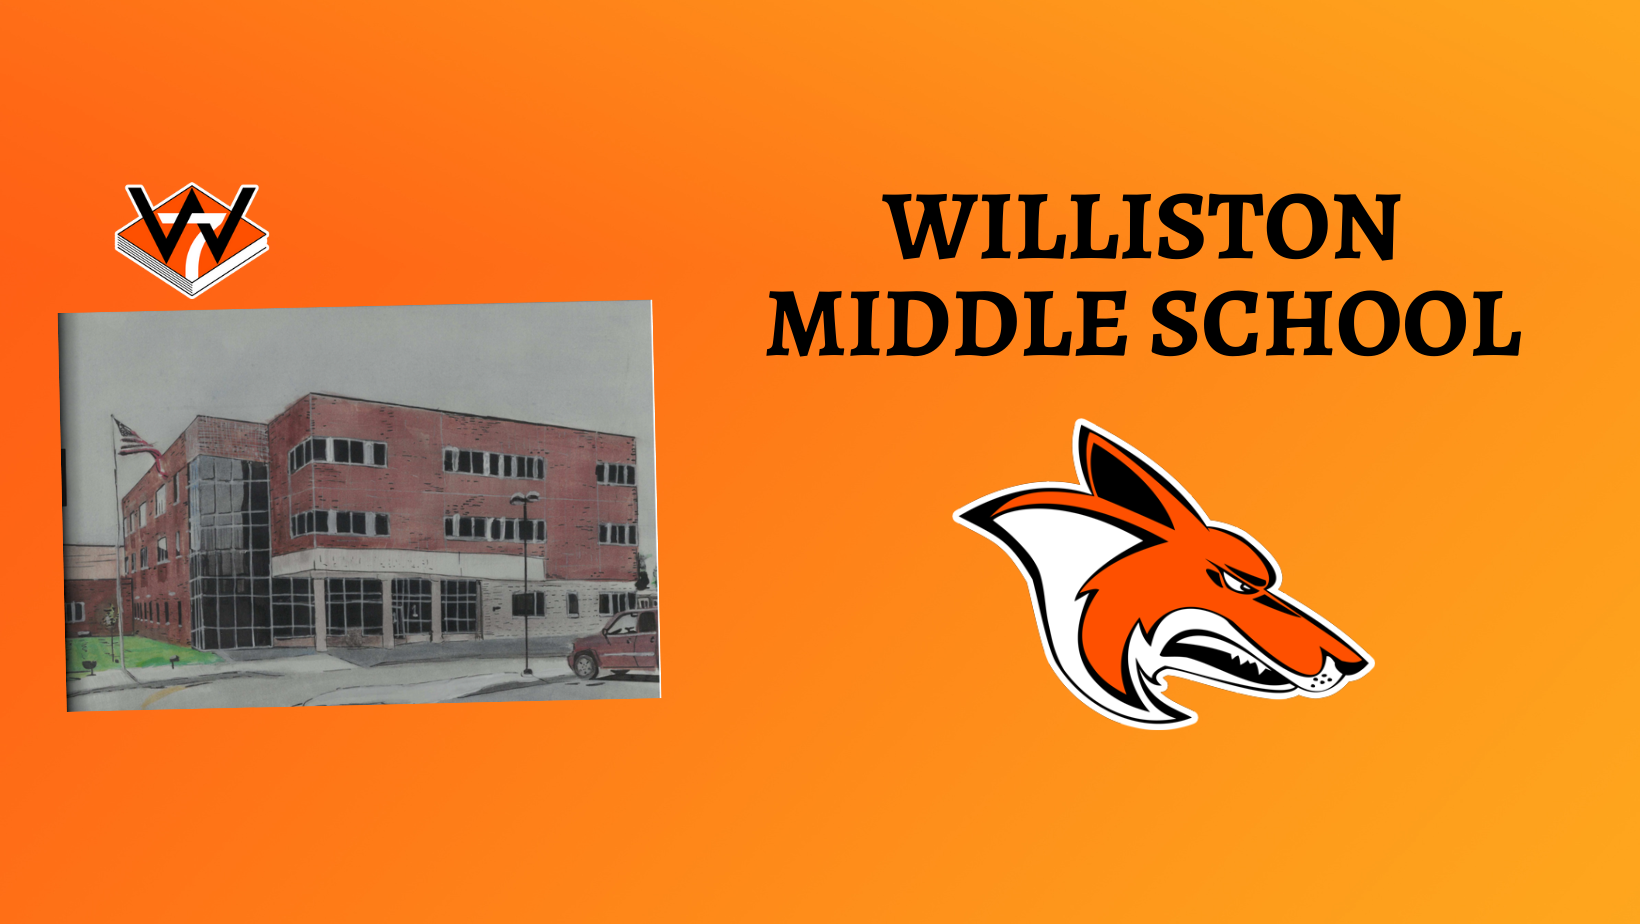 Williston Middle School logo, building, and D7 logo